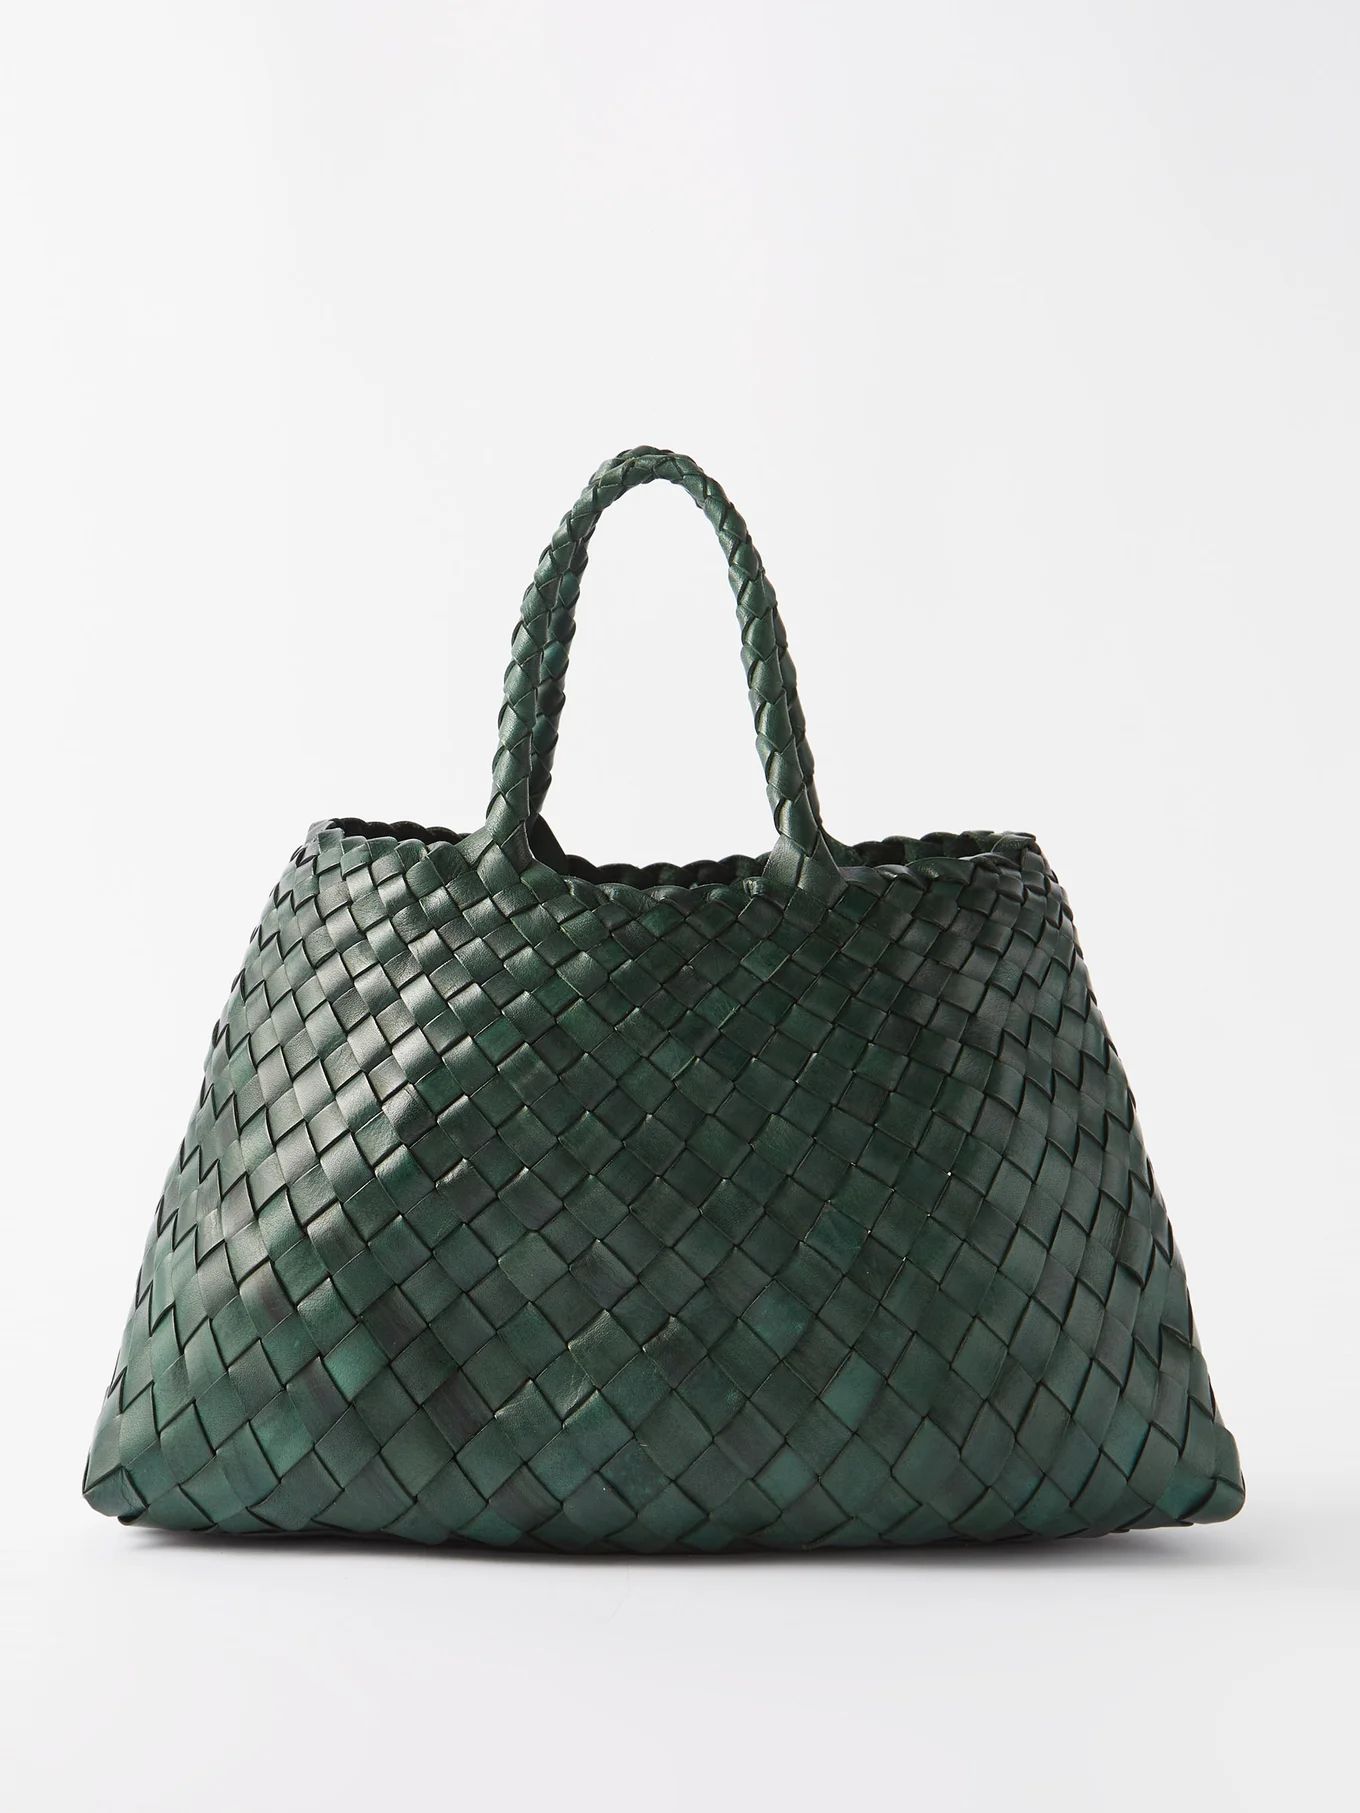 Santa Croce small woven-leather tote bag | Matches (UK)